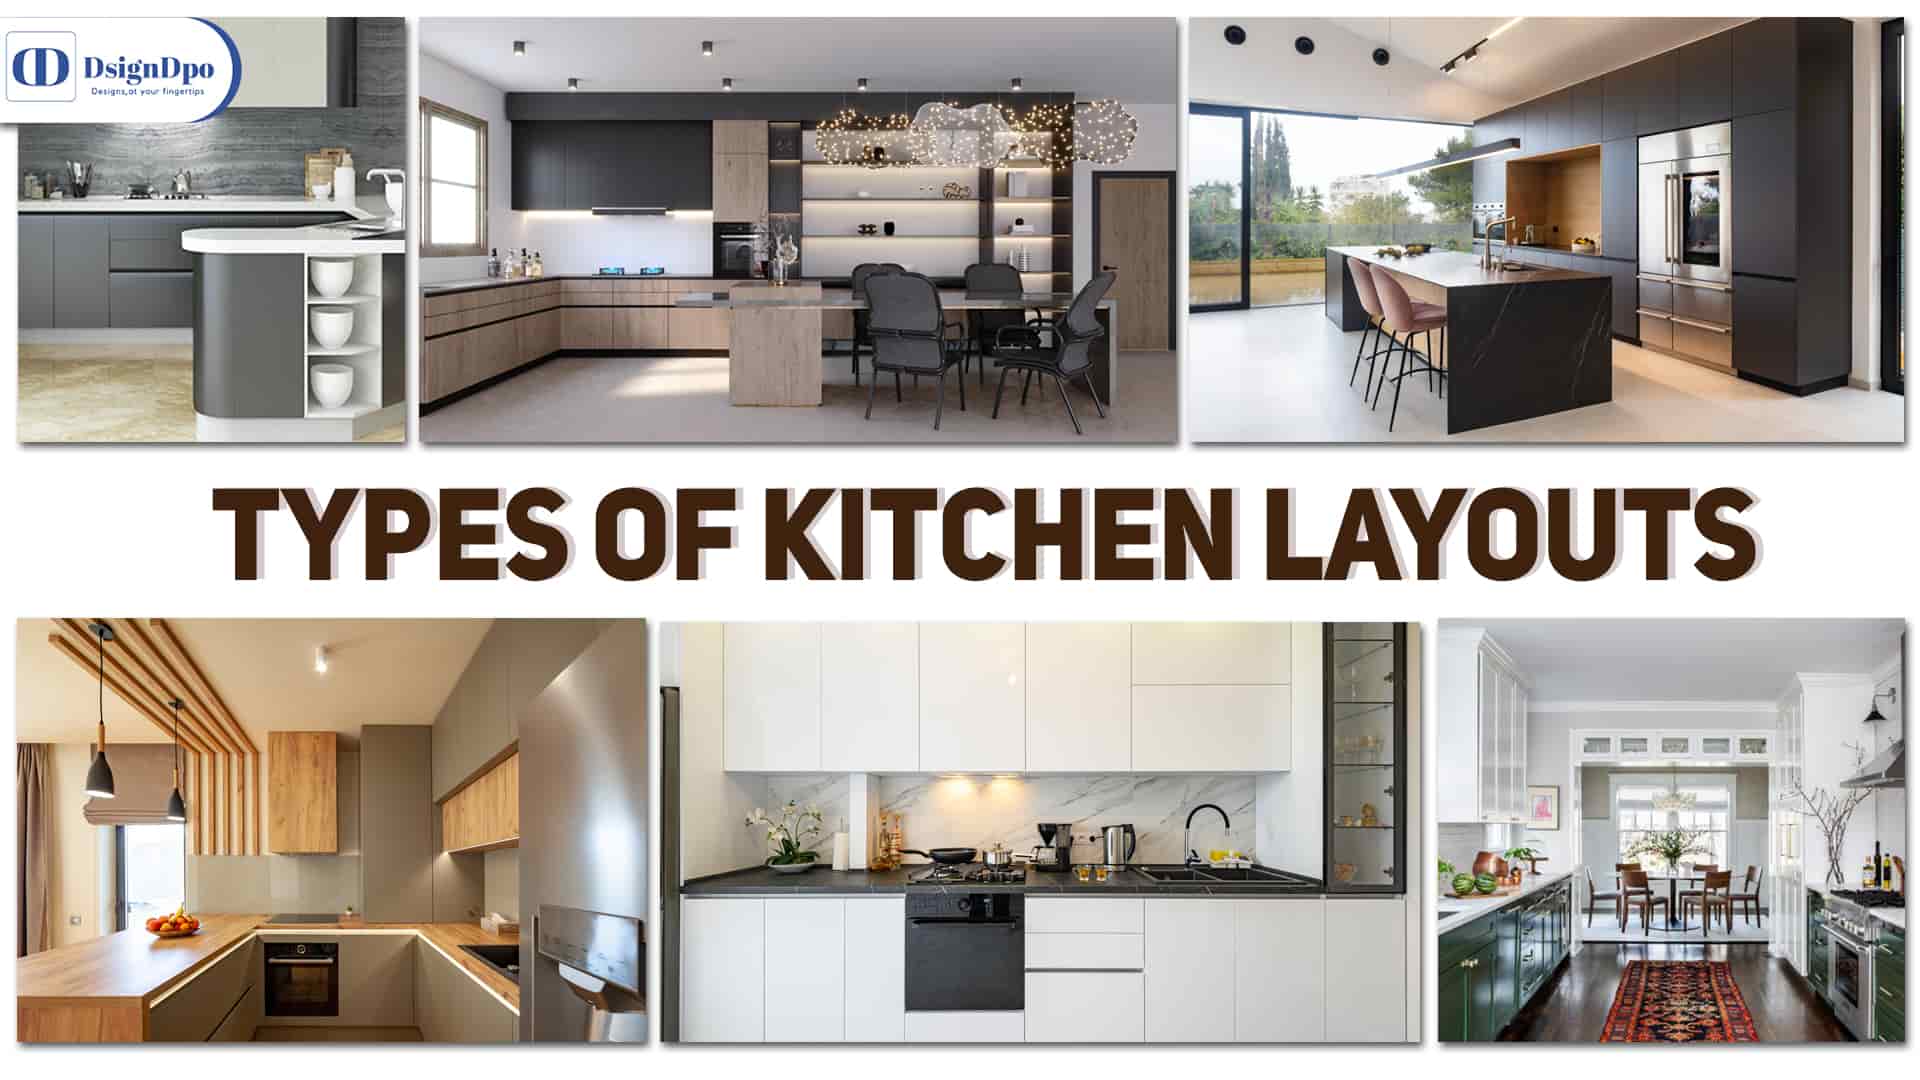 Types of Kitchen Layouts